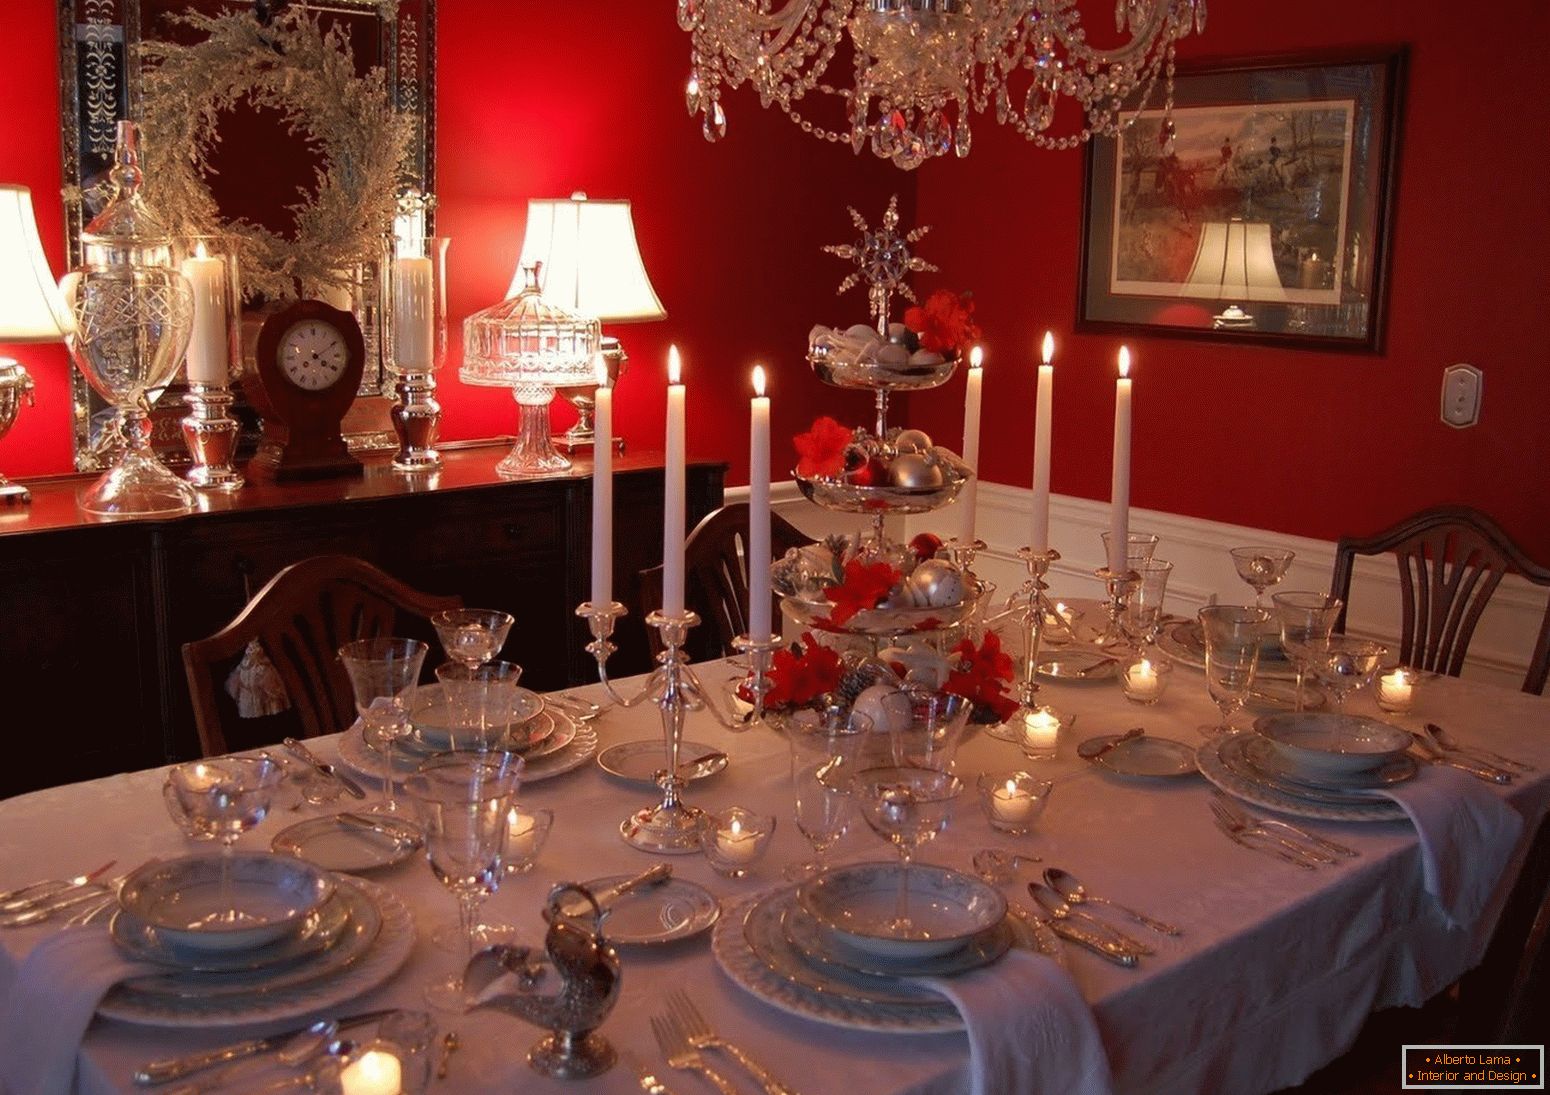 Decor of the New Year's table